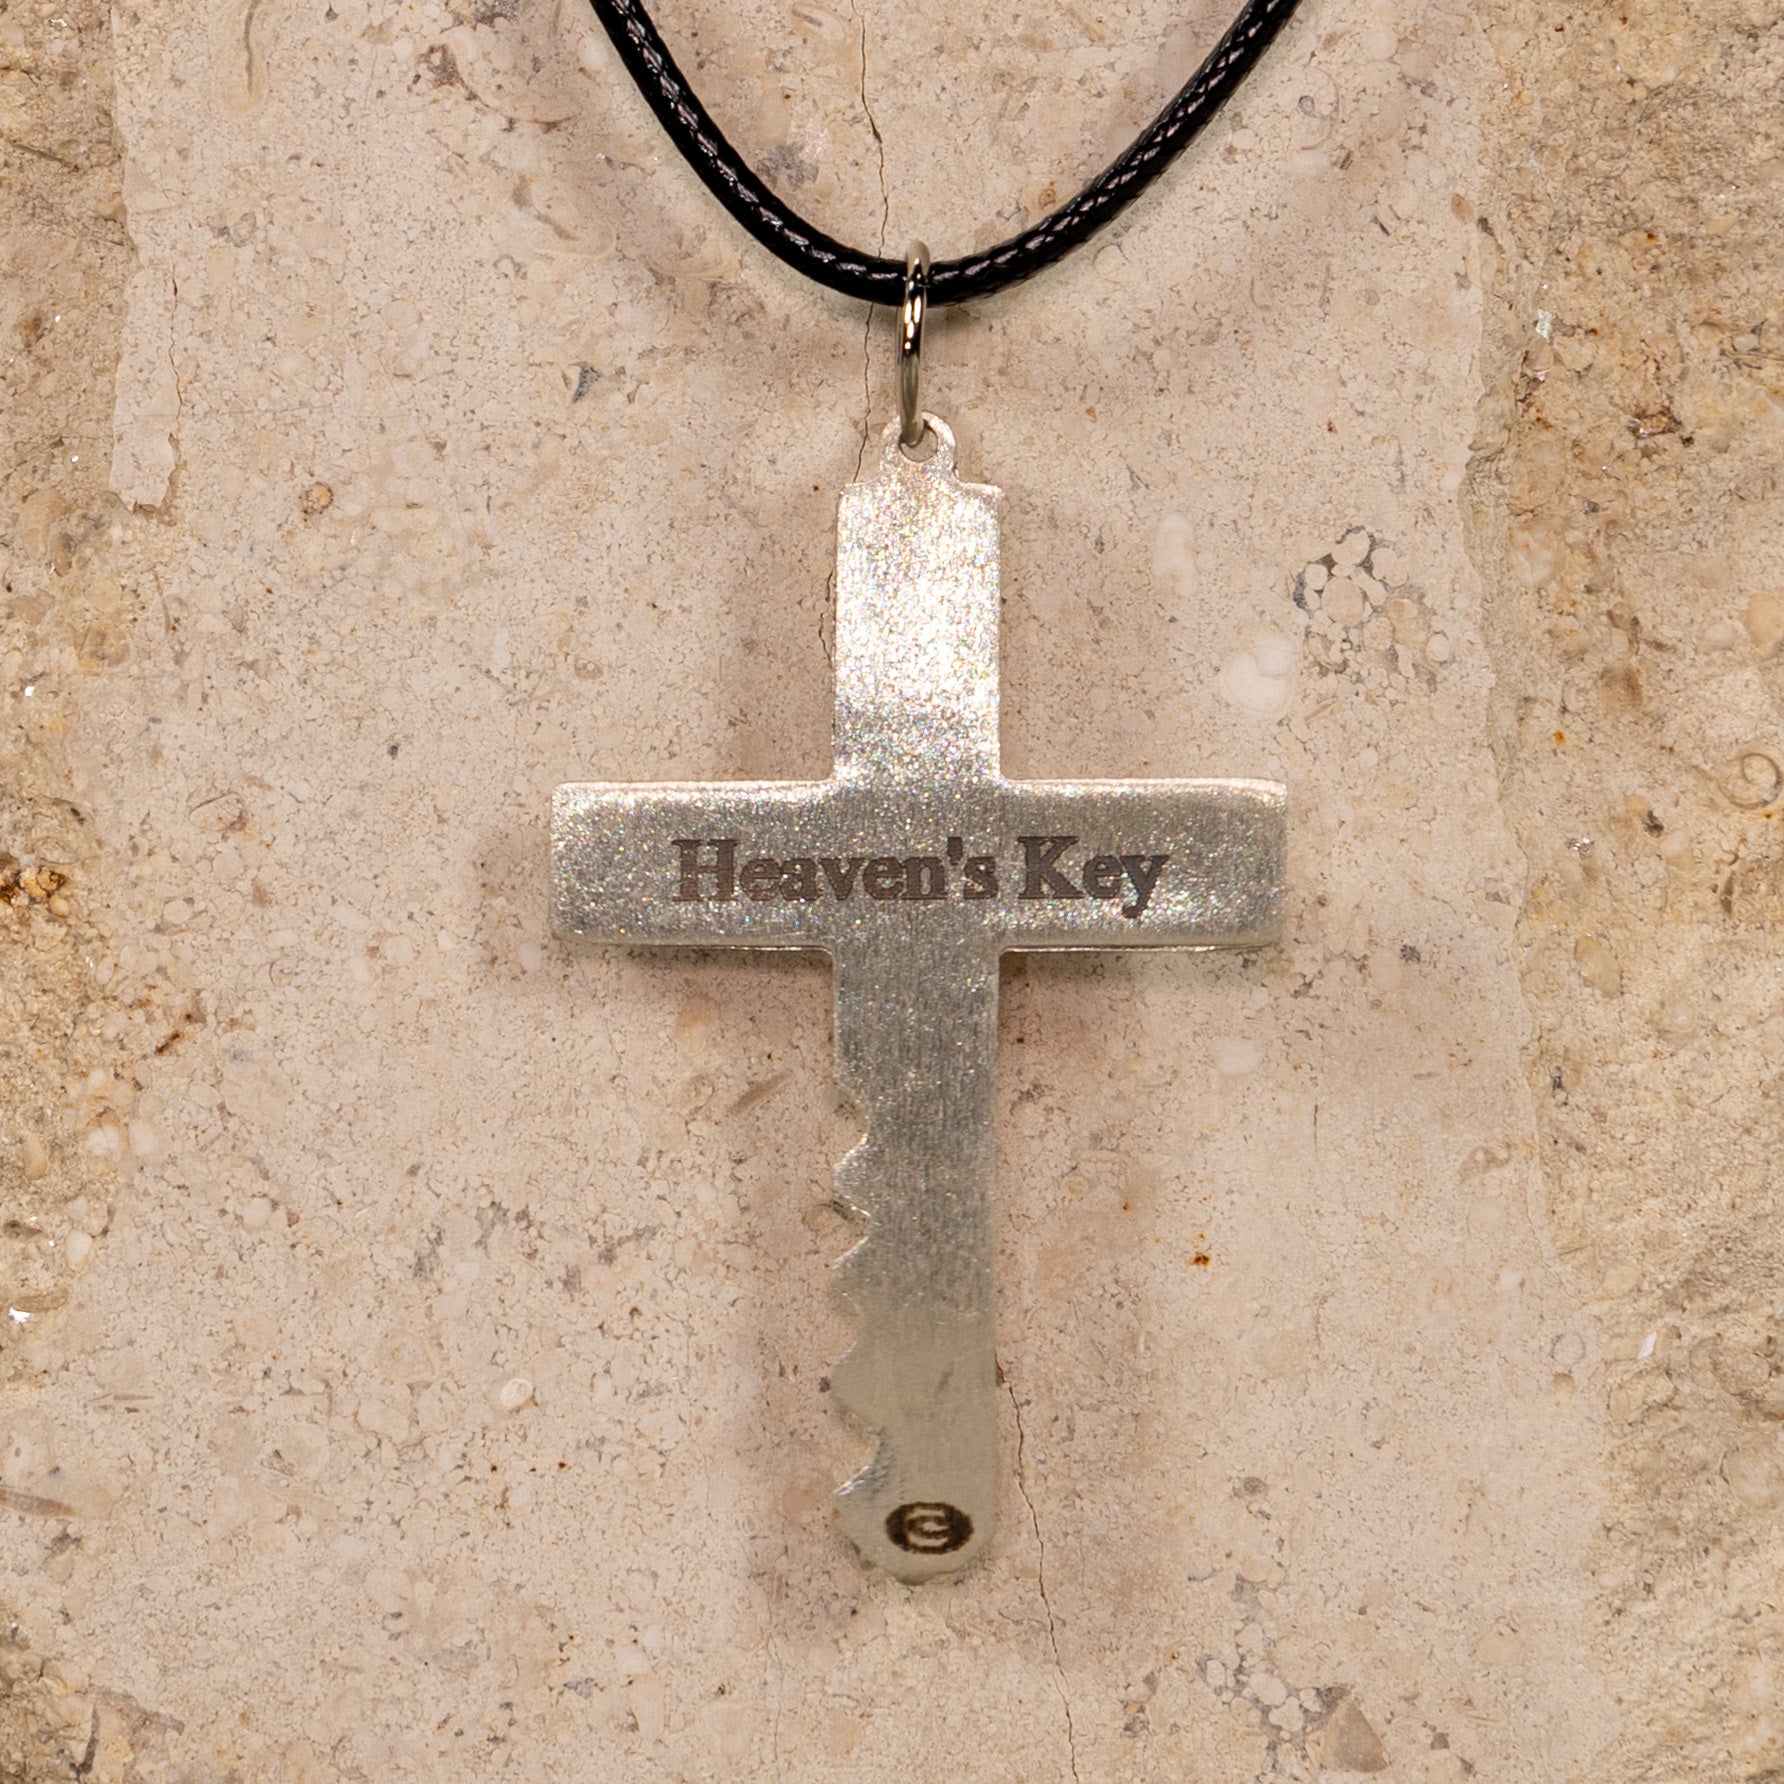 The Key to Heaven Sterling Silver Medium Pendant